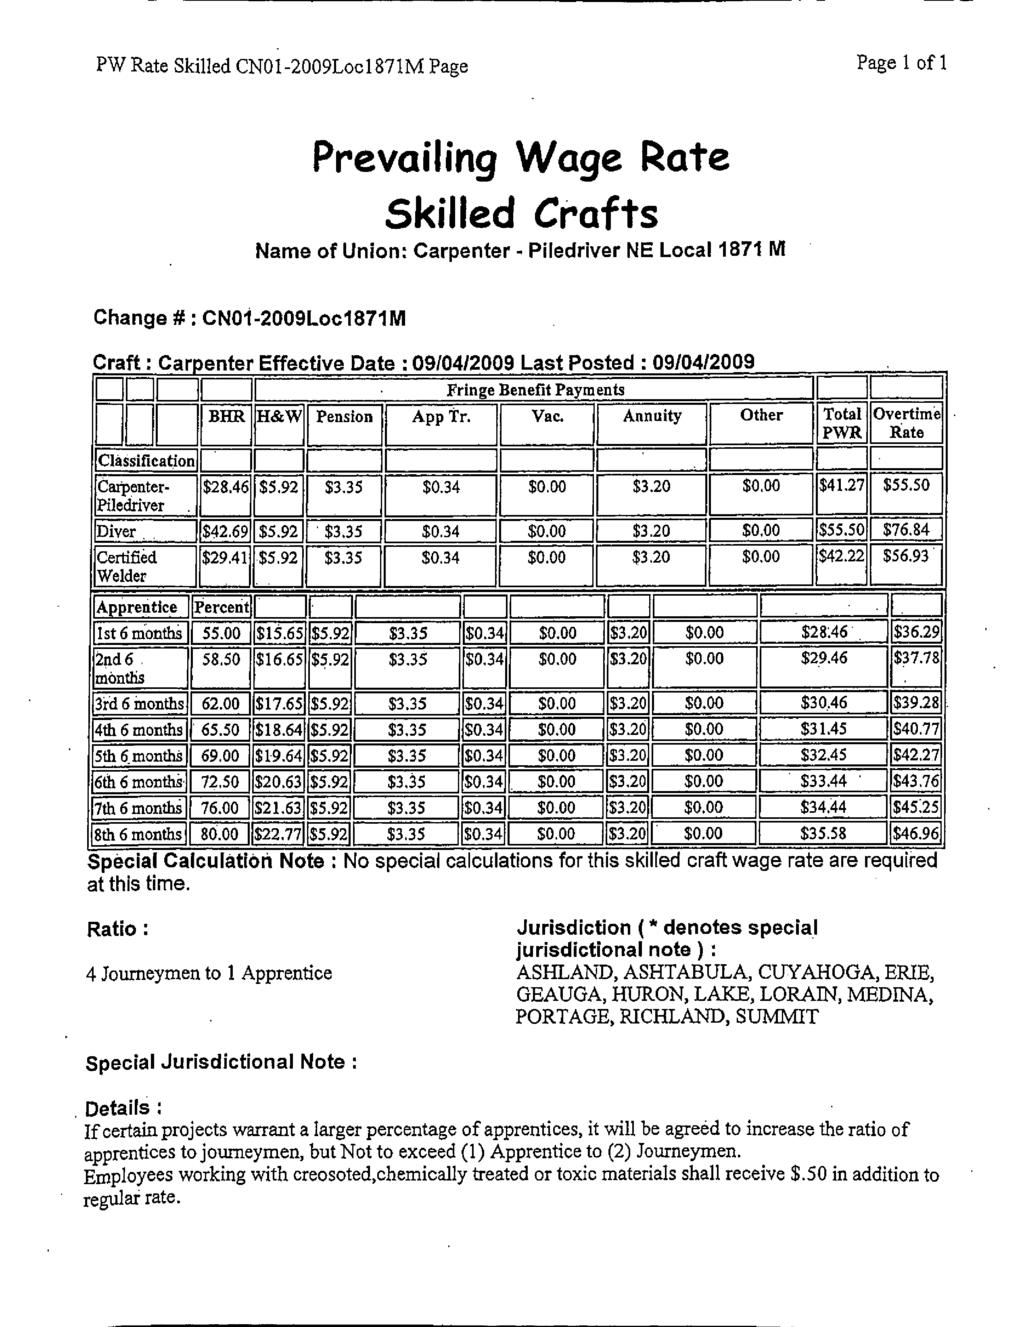 PW Rate Skilled CNO1-2009Loc1871M Page Page 1 of 1 Prevailing Wage Rate Skilled Crafts Name of Union: Carpenter Piledriver NE Local 1871 M Change #: CNO1-2009Loc1871M Craft : Car enter Effective Date